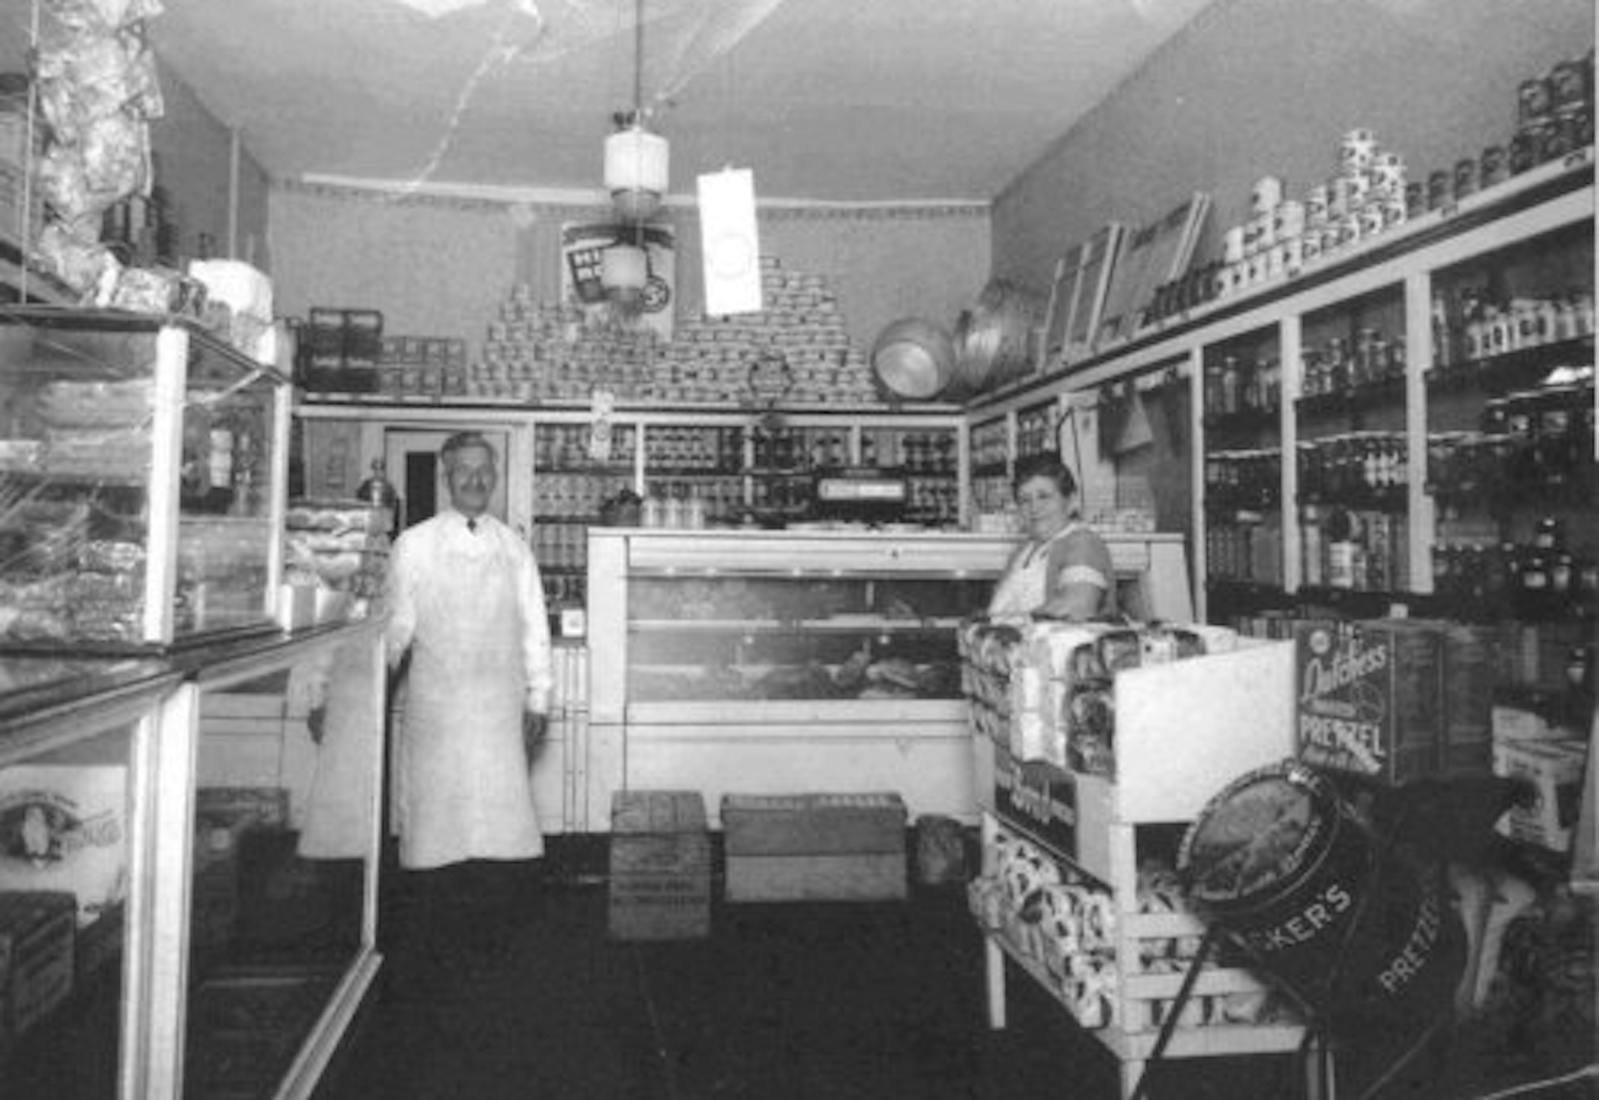 Amy’s great grandfather Morris and his wife Rebecca Zitelman in their corner store in Baltimore in the 1930s.